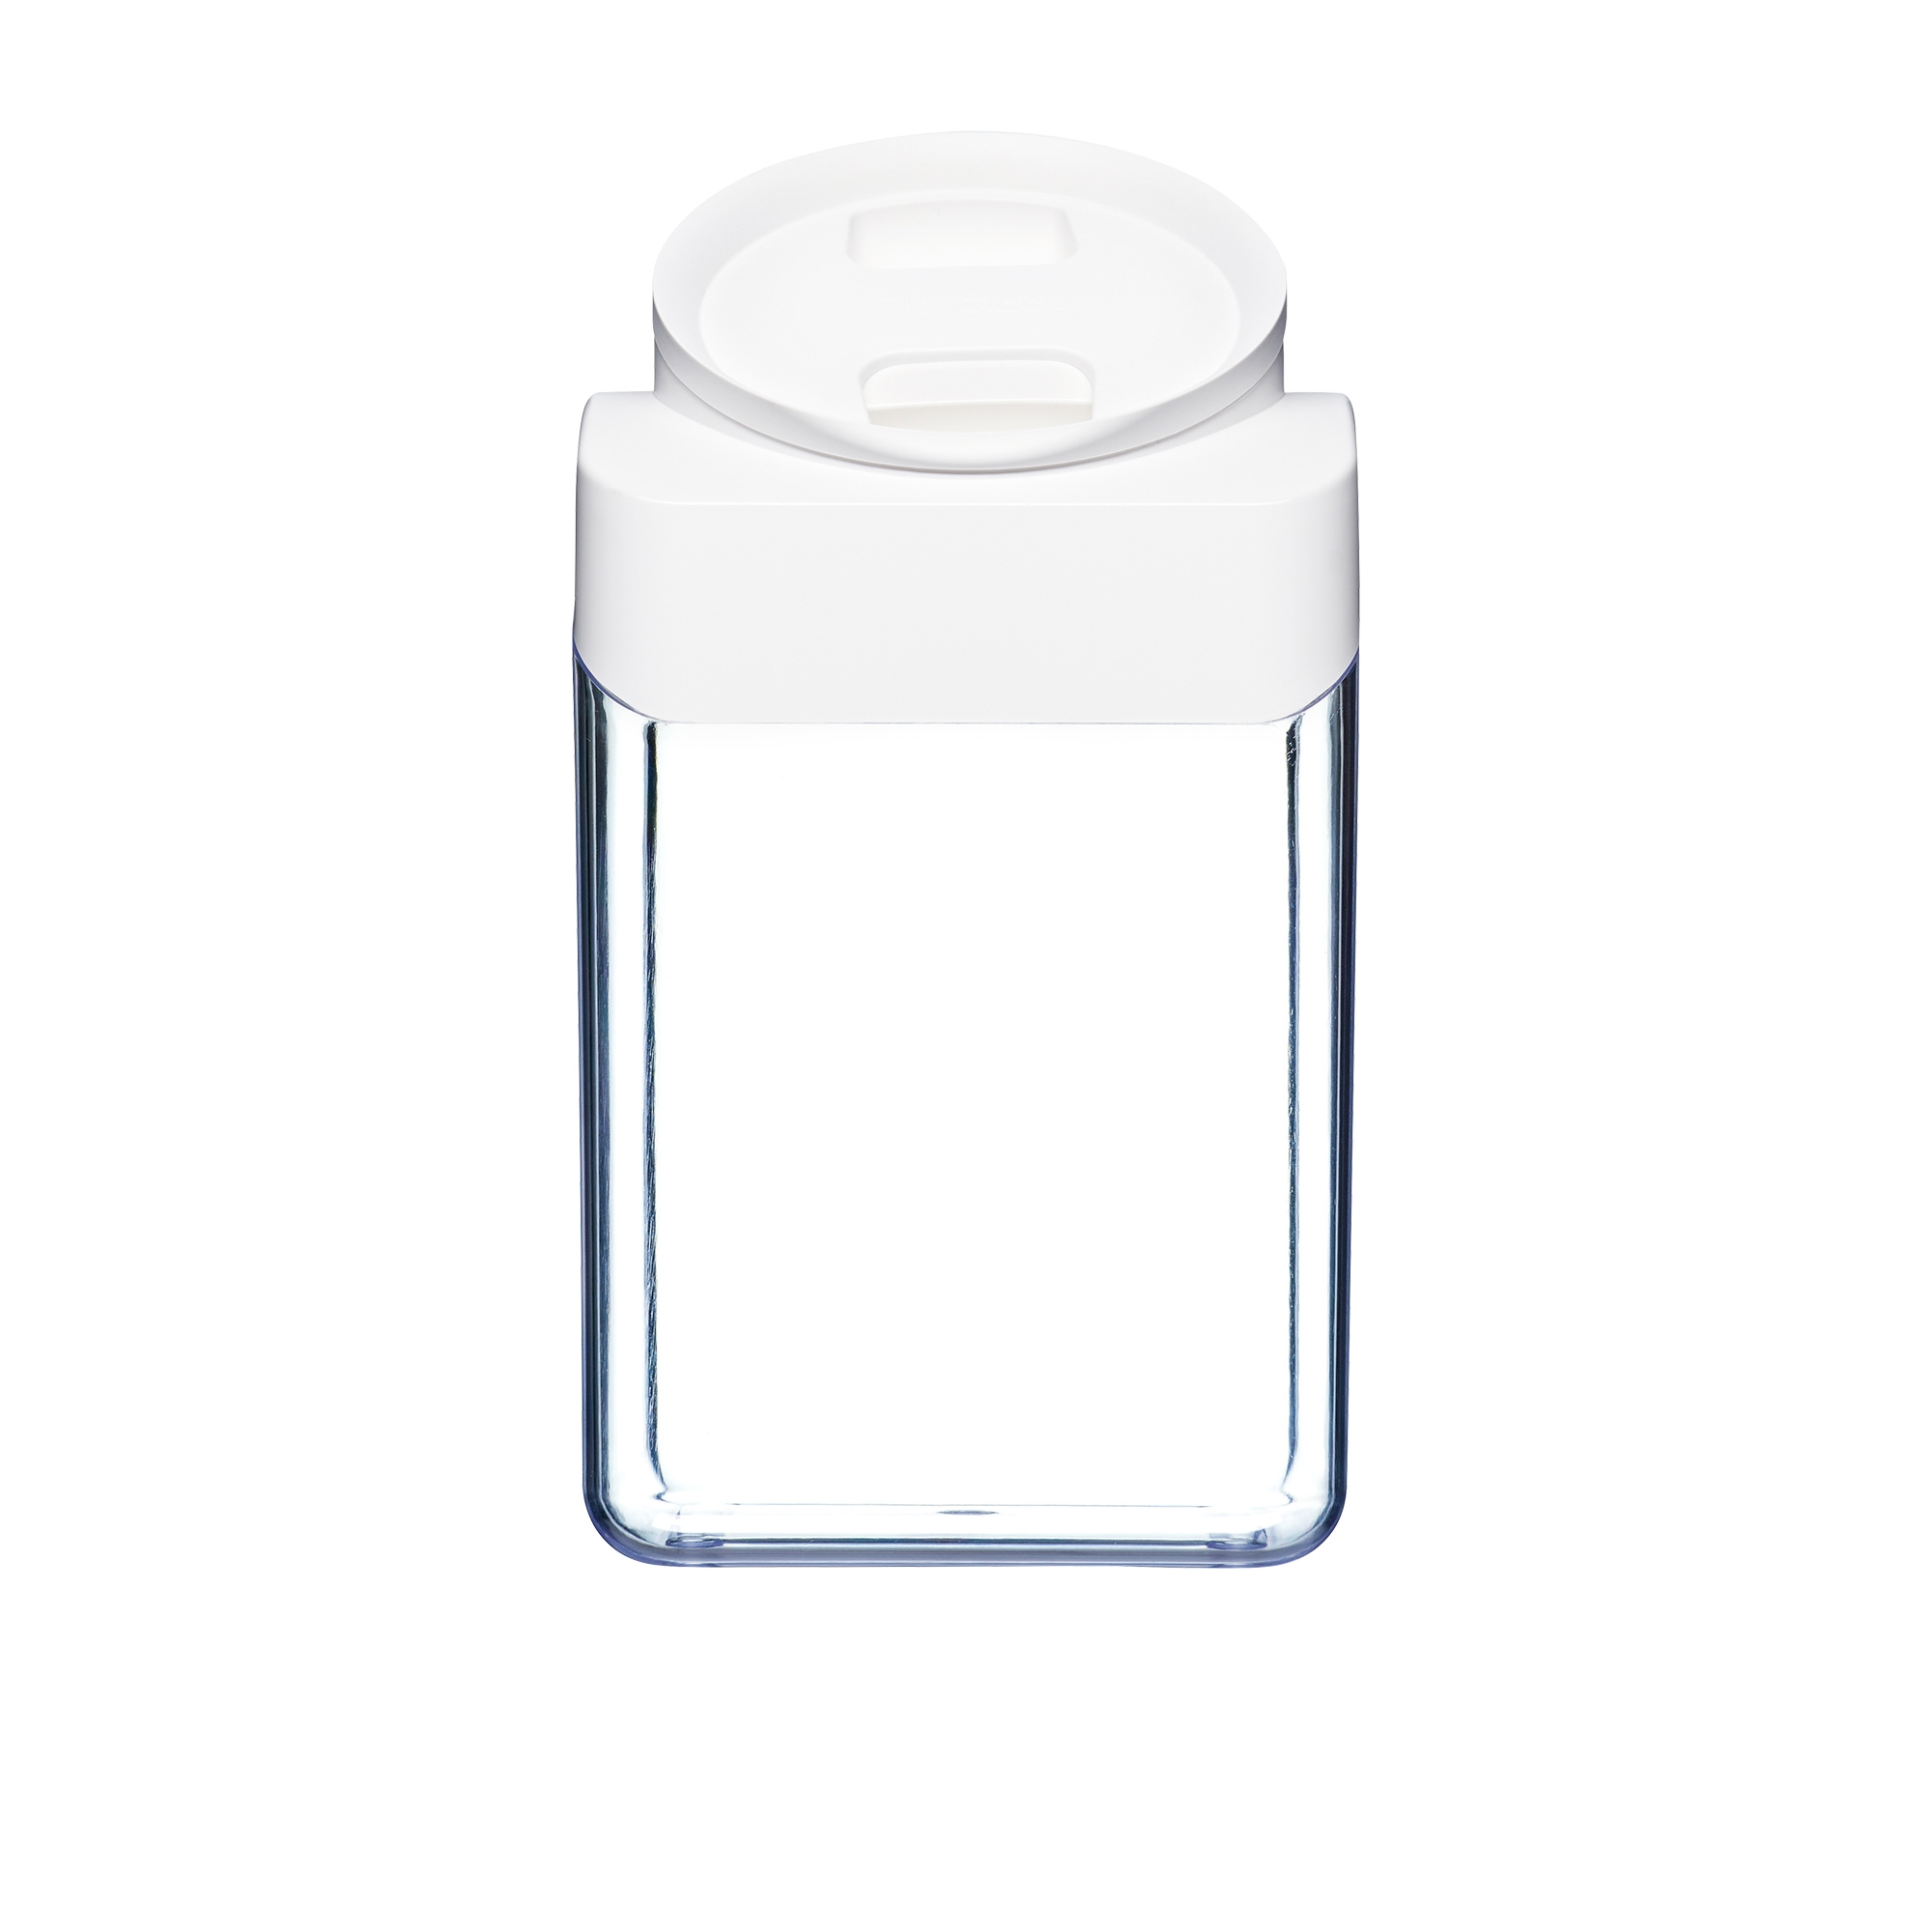 ClickClack Pantry Store All Container 4.2L White Image 1